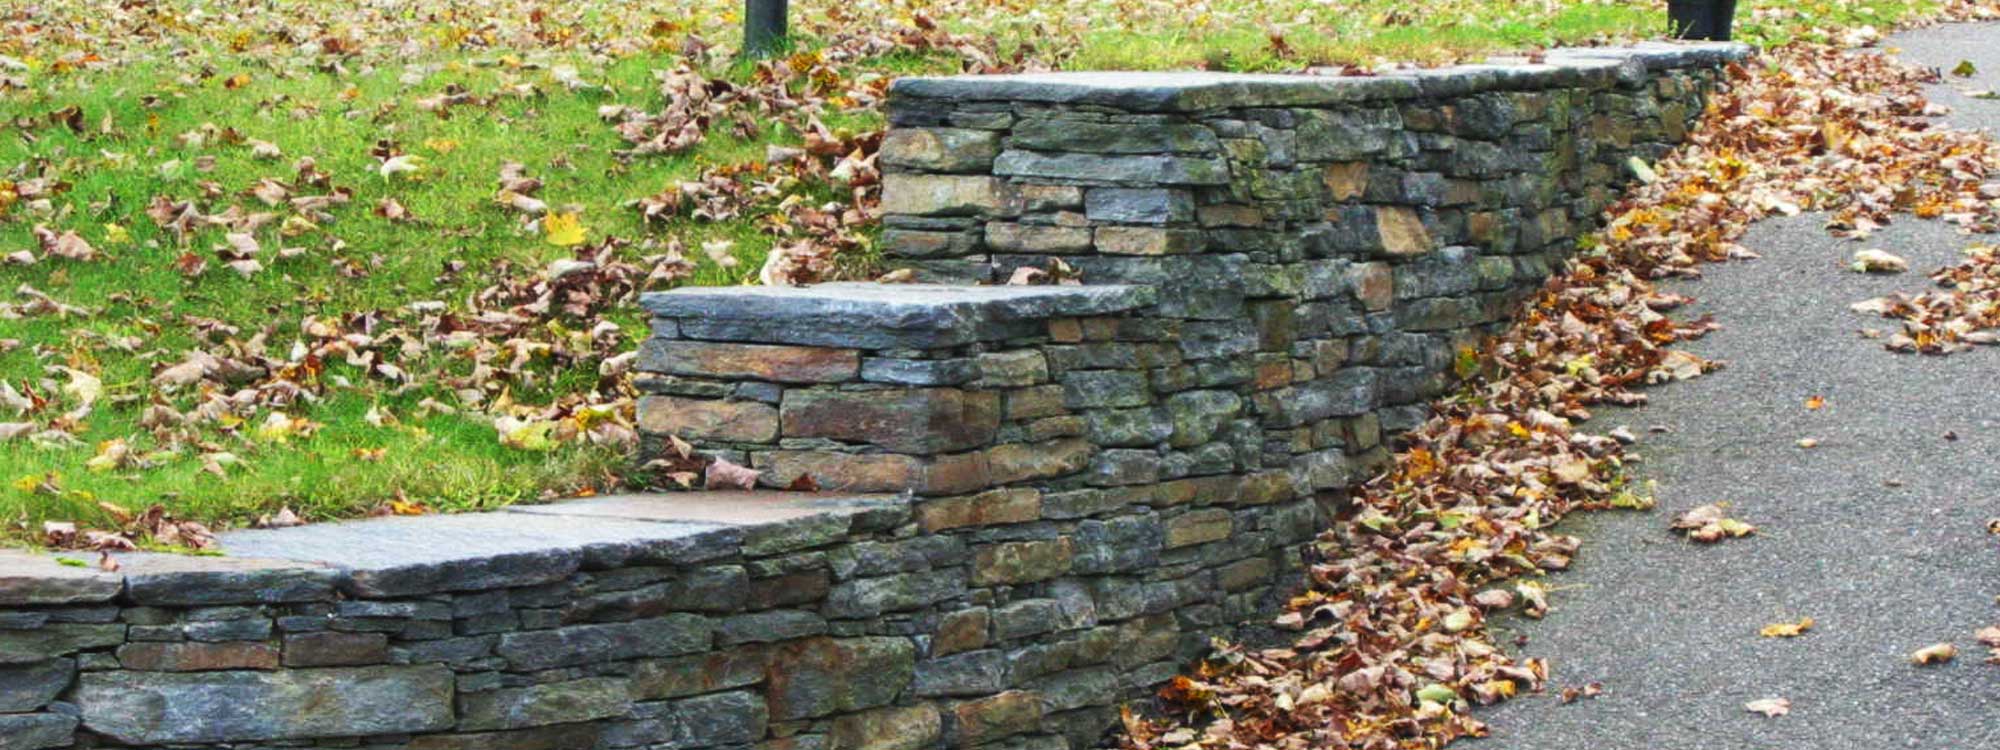 Friendship Retaining Wall and Garden Wall Construction